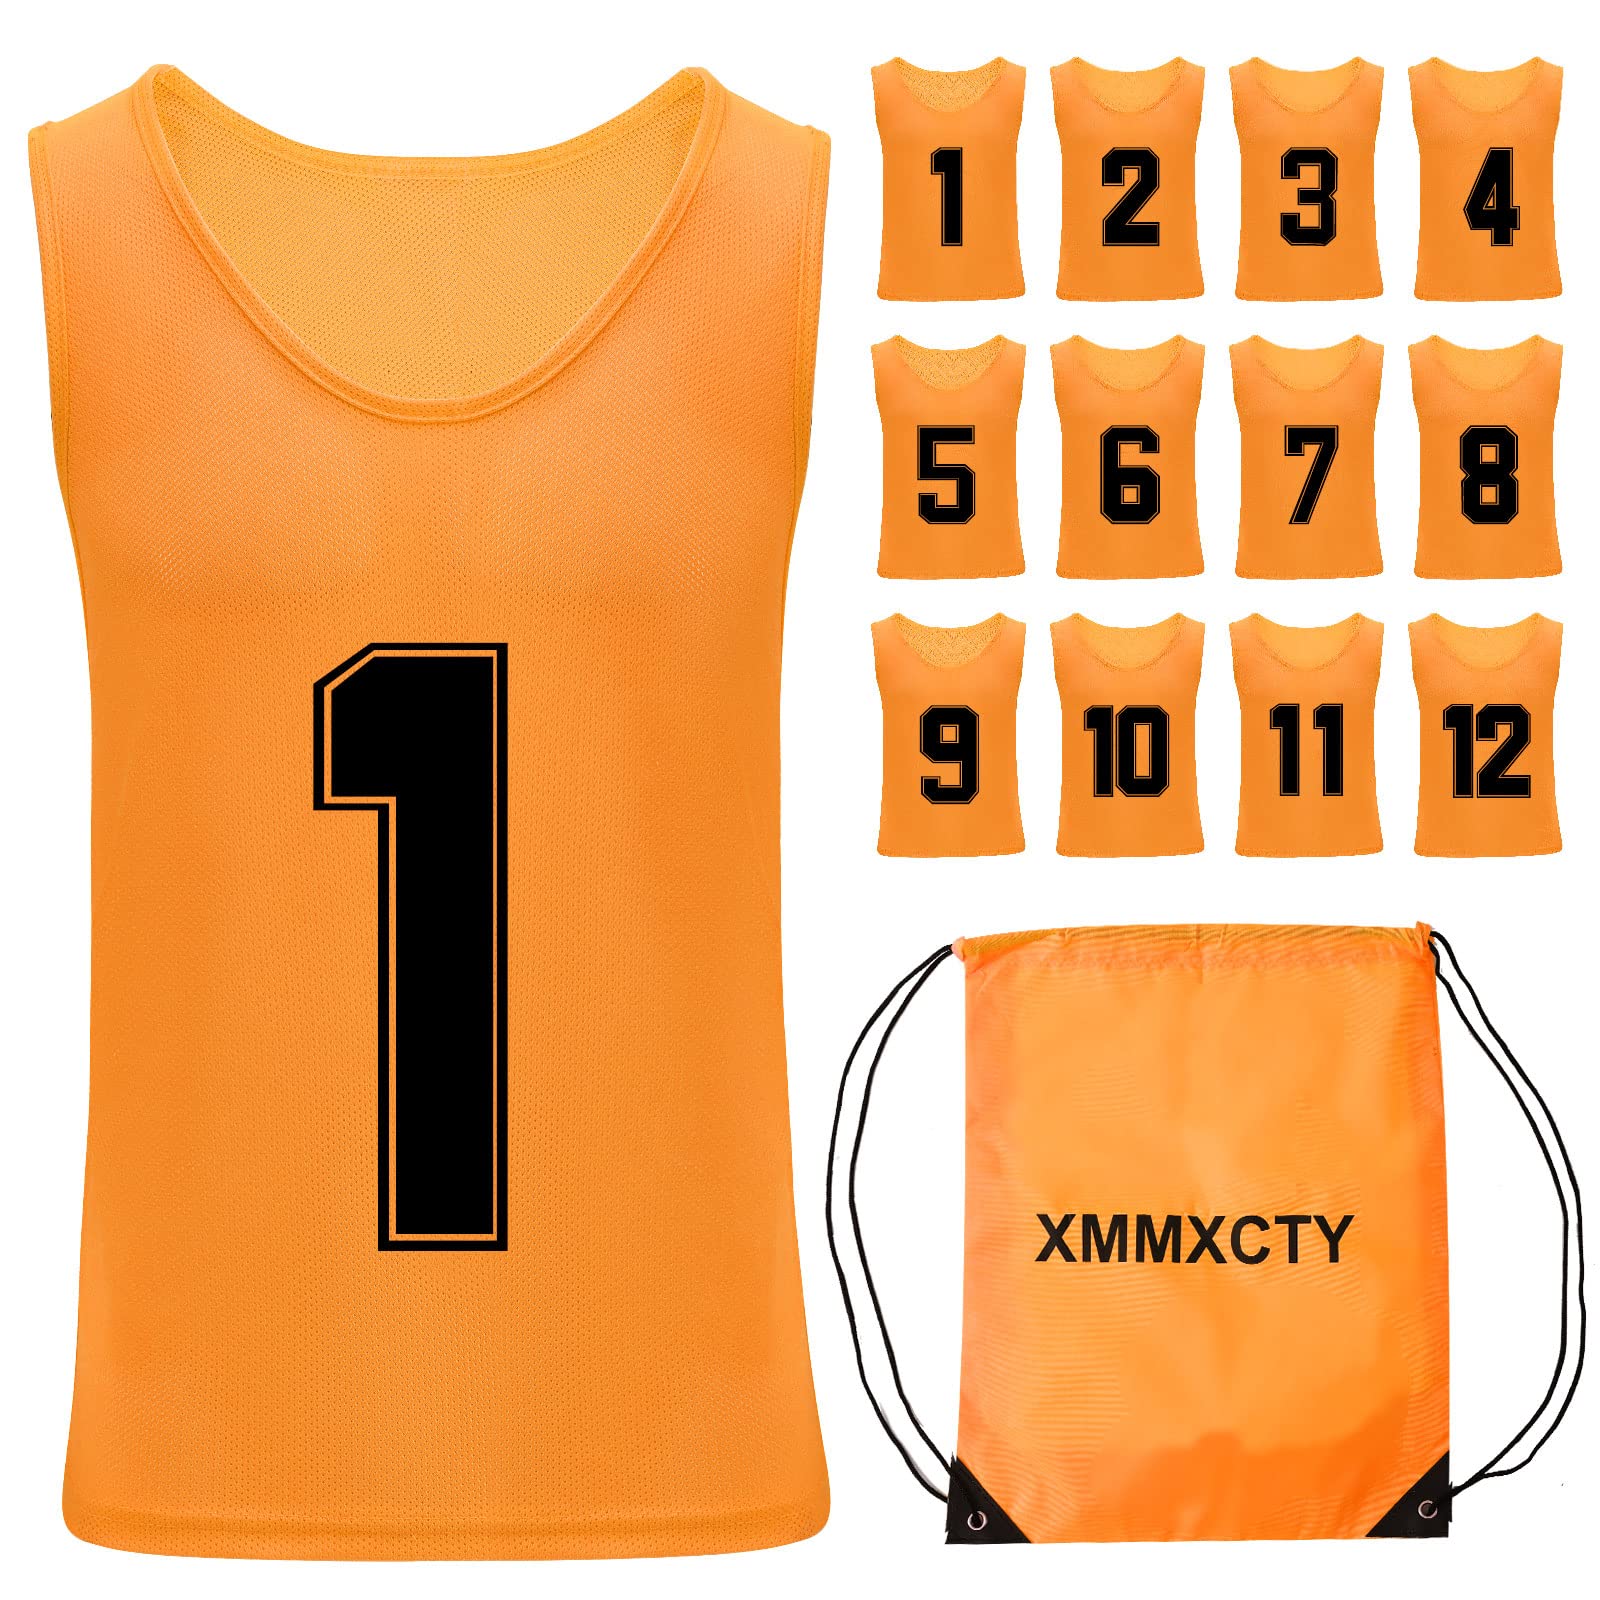 XMMXCTY Numbered Vest (12 Pieces)/Sport Pinnies/Mesh Scrimmage Jersey for Children Youth Sports Basketball, Soccer, Baseball